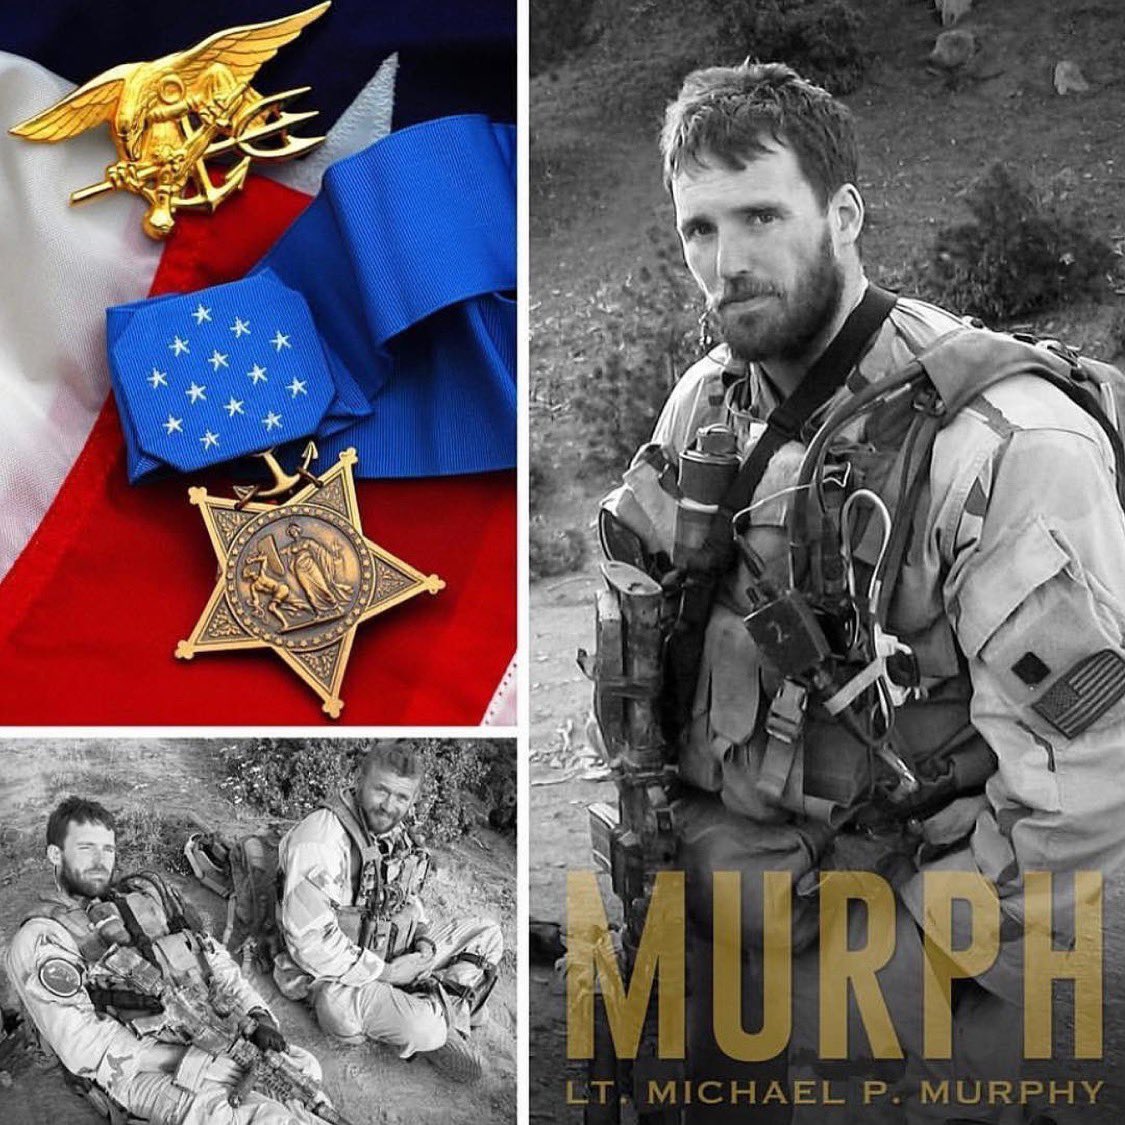 #NationalMedalOfHonorDay

On June 28, 2005, LT. Michael P. Murphy valiantly gave his life in order to save the lives of his fellow SEALs. His actions would lead him to posthumously receive our nation’s highest military award, the Medal of Honor. 🇺🇸